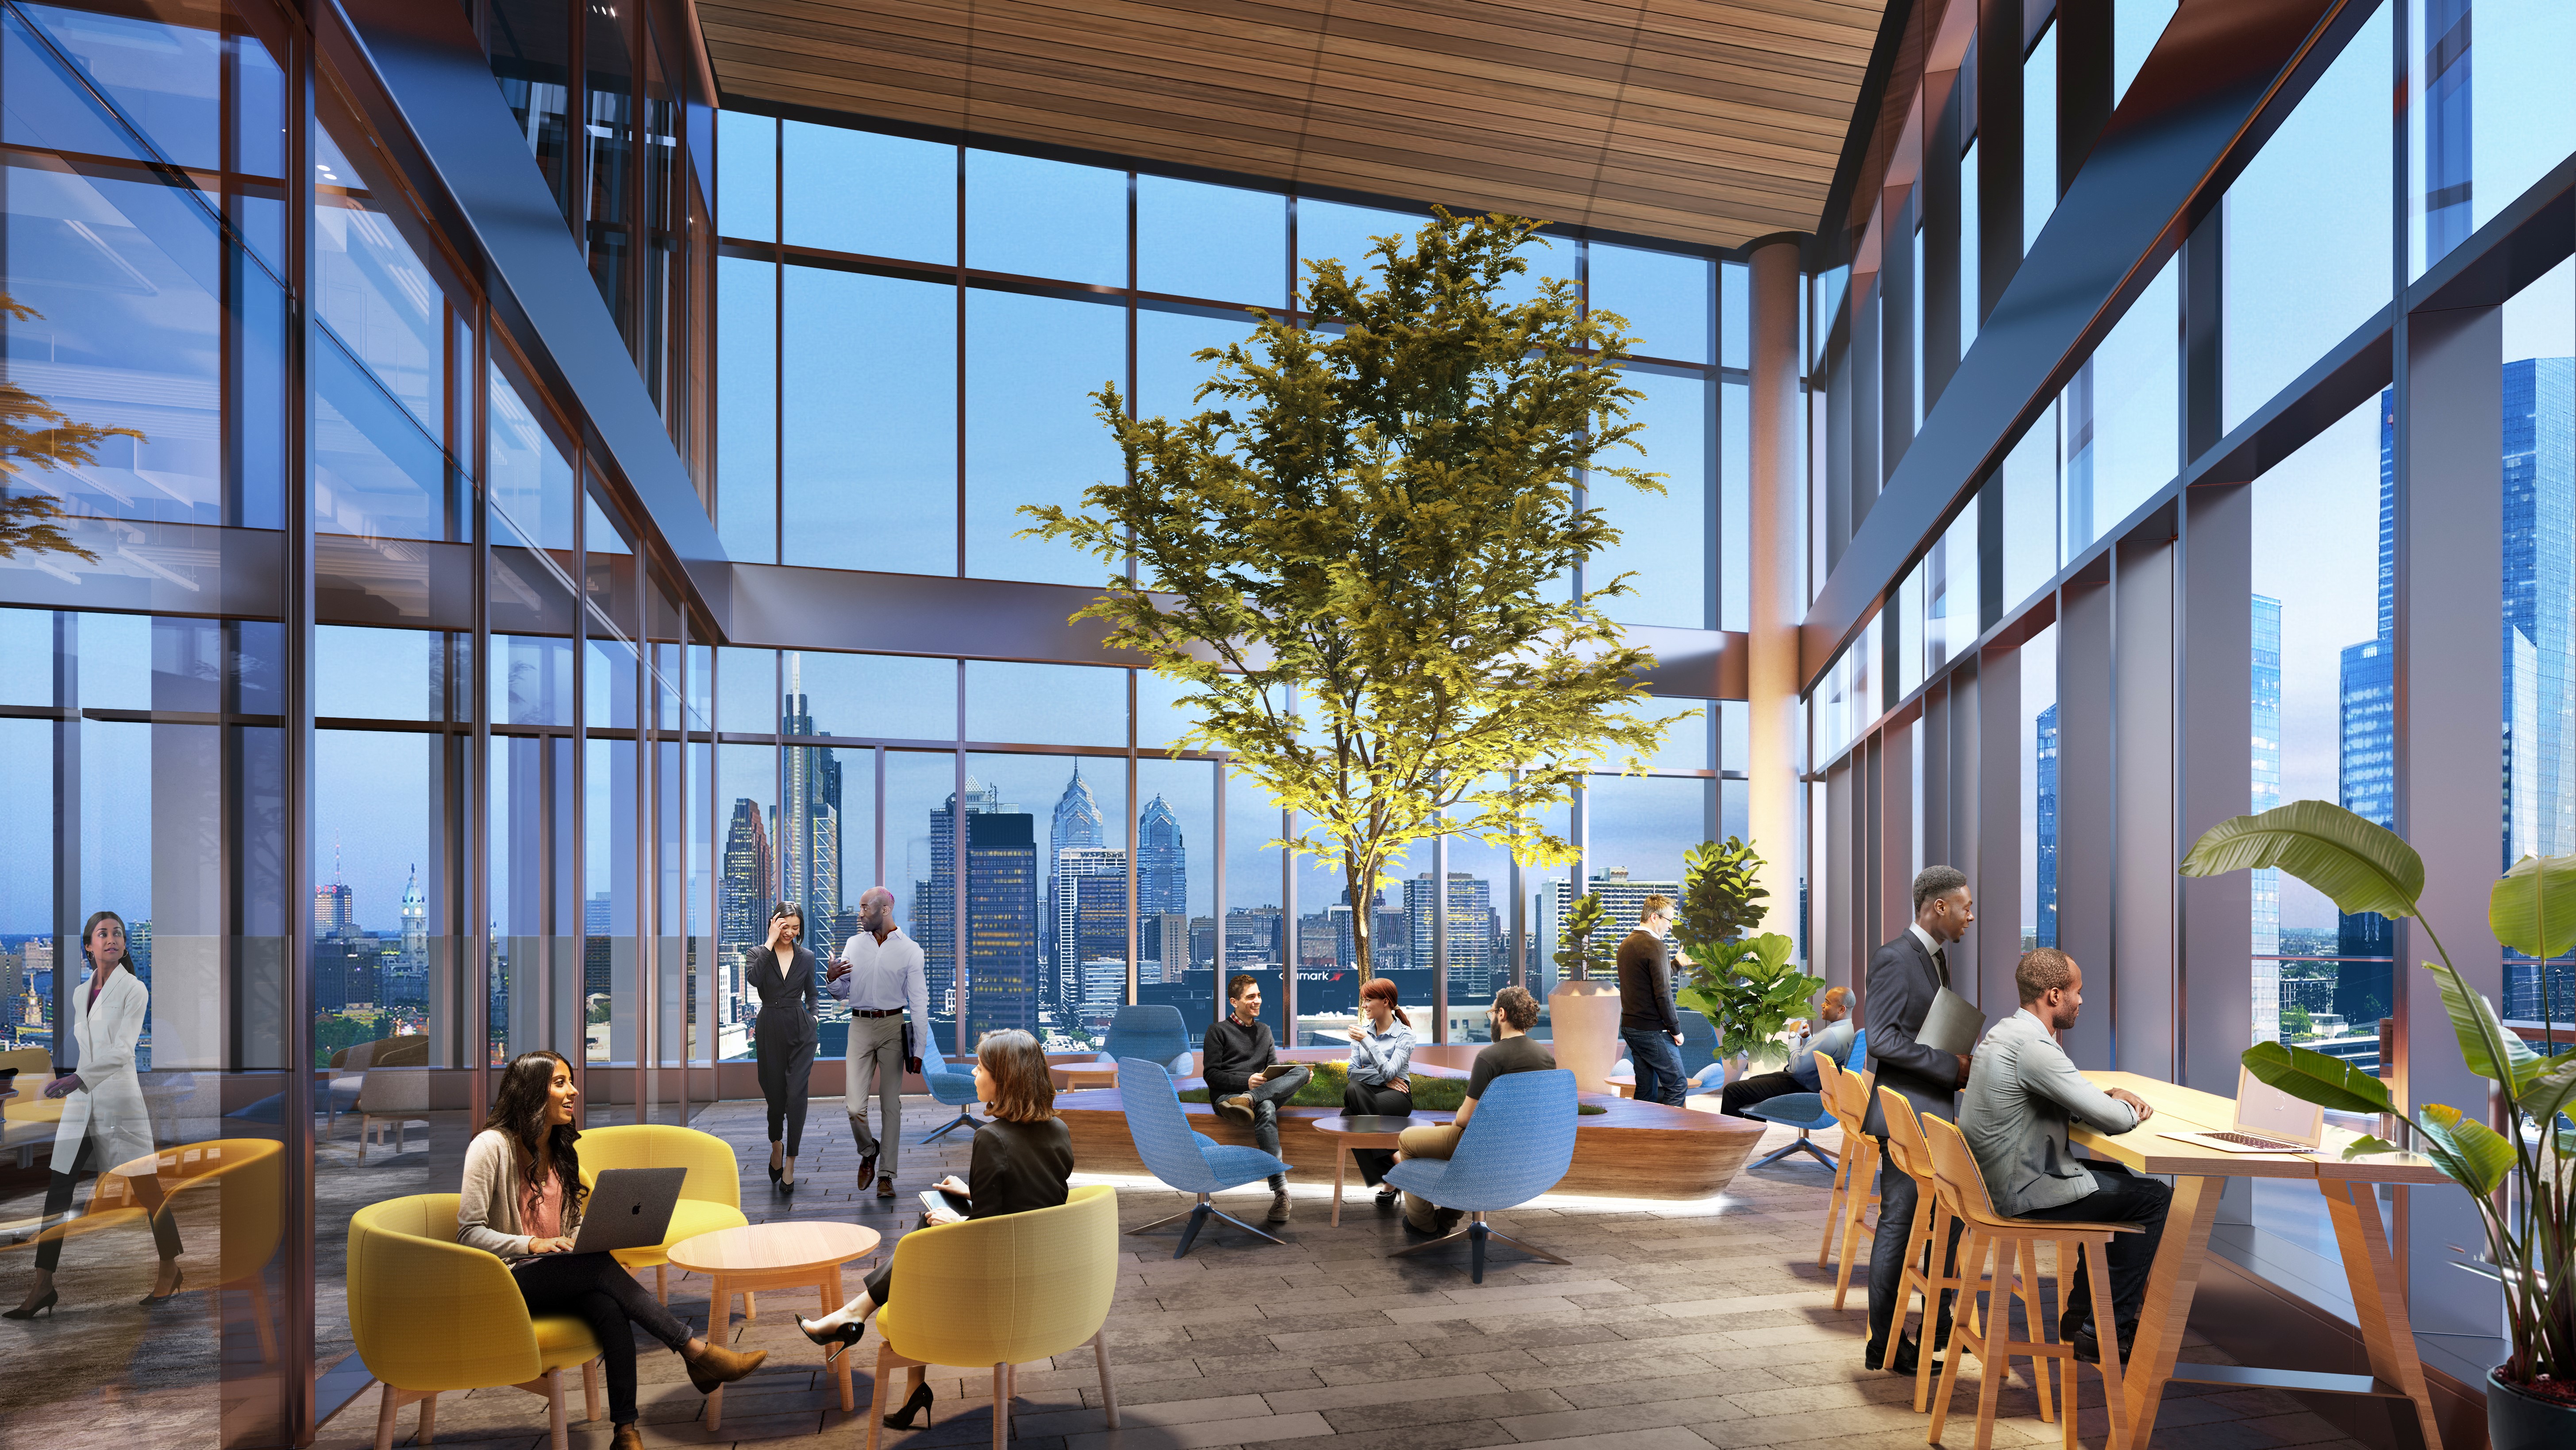 Design of Brandywine's proposed $300M Schuylkill Yards life sciences building takes shape